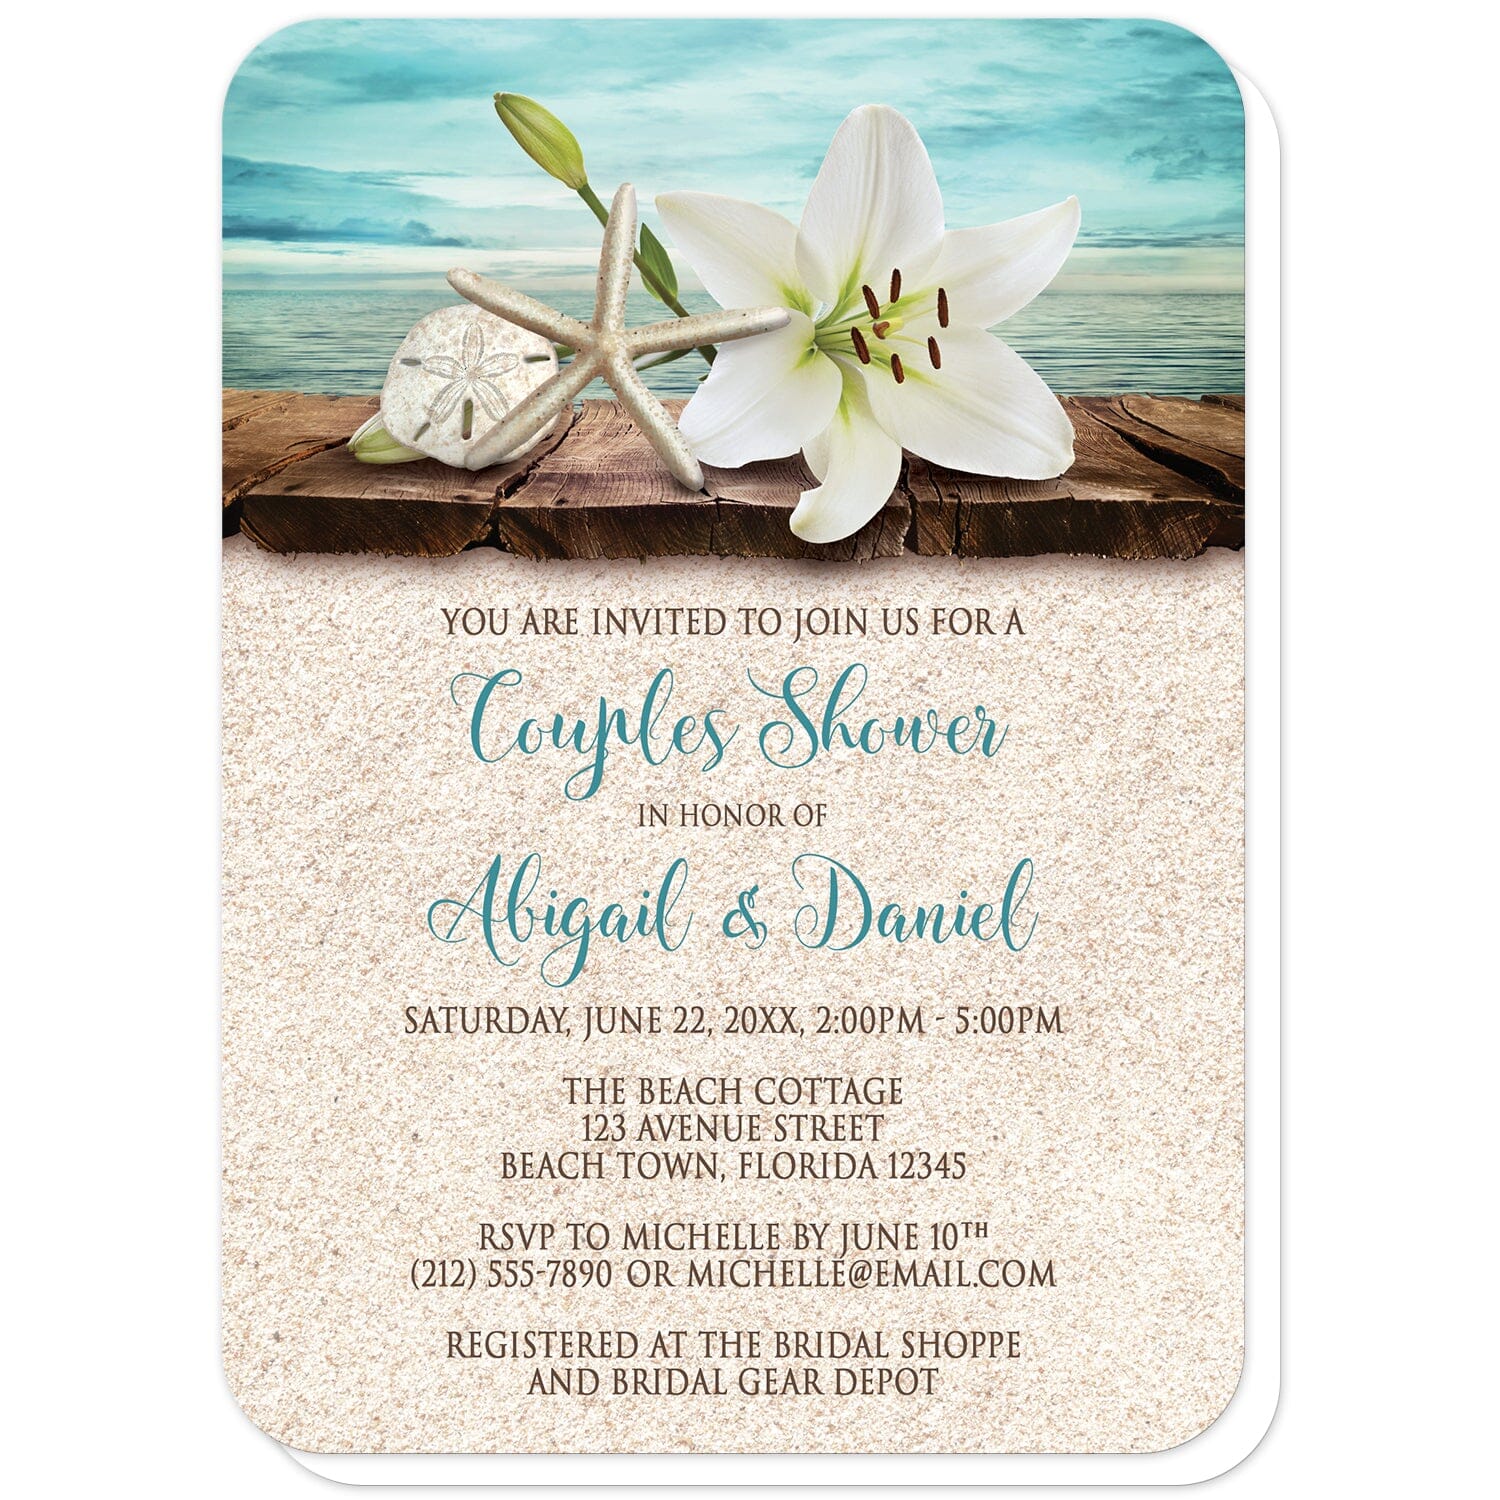 Lily Seashells and Sand Beach Couples Shower Invitations (with rounded corners) at Artistically Invited. Floral lily seashells and sand beach couples shower invitations with an elegant white lily, a starfish, and a sand dollar on a rustic wood dock overlooking the open water. Your personalized couples shower celebration details are custom printed in dark brown and teal over a beige sand background design. 